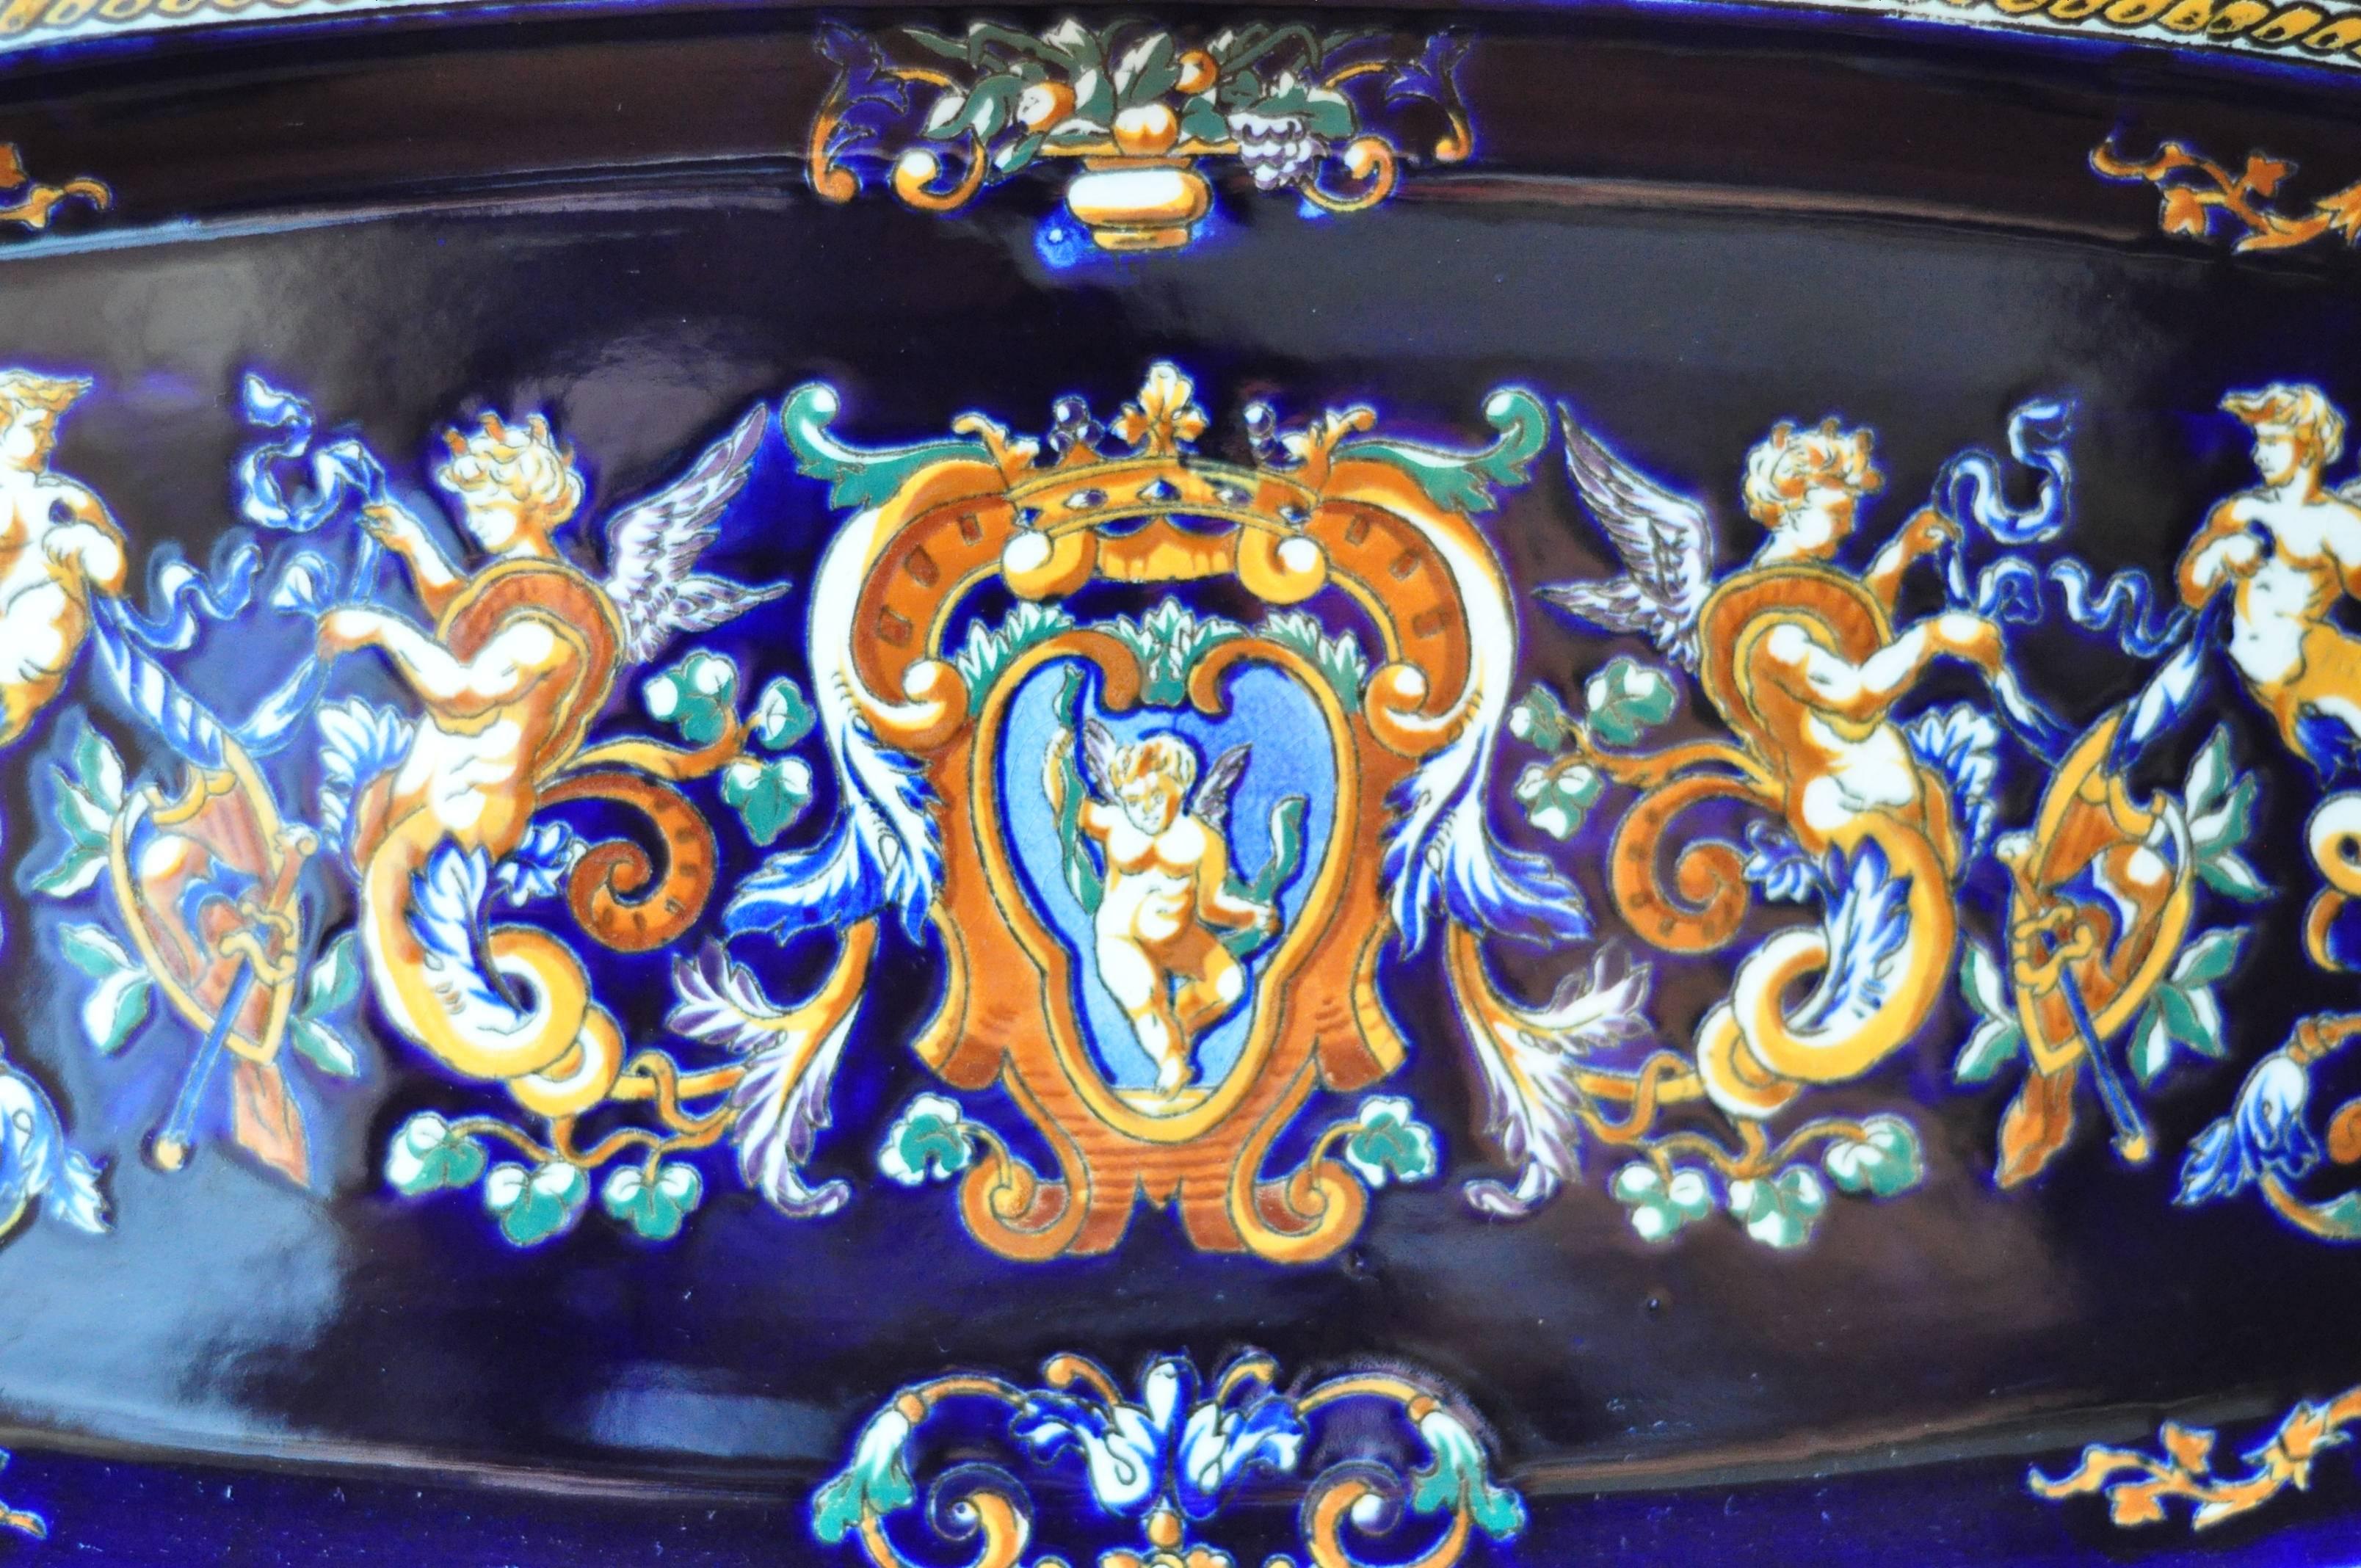 This exquisite and rare, free-form edging, antique Gien Faience Plat a Poisson is made in the 